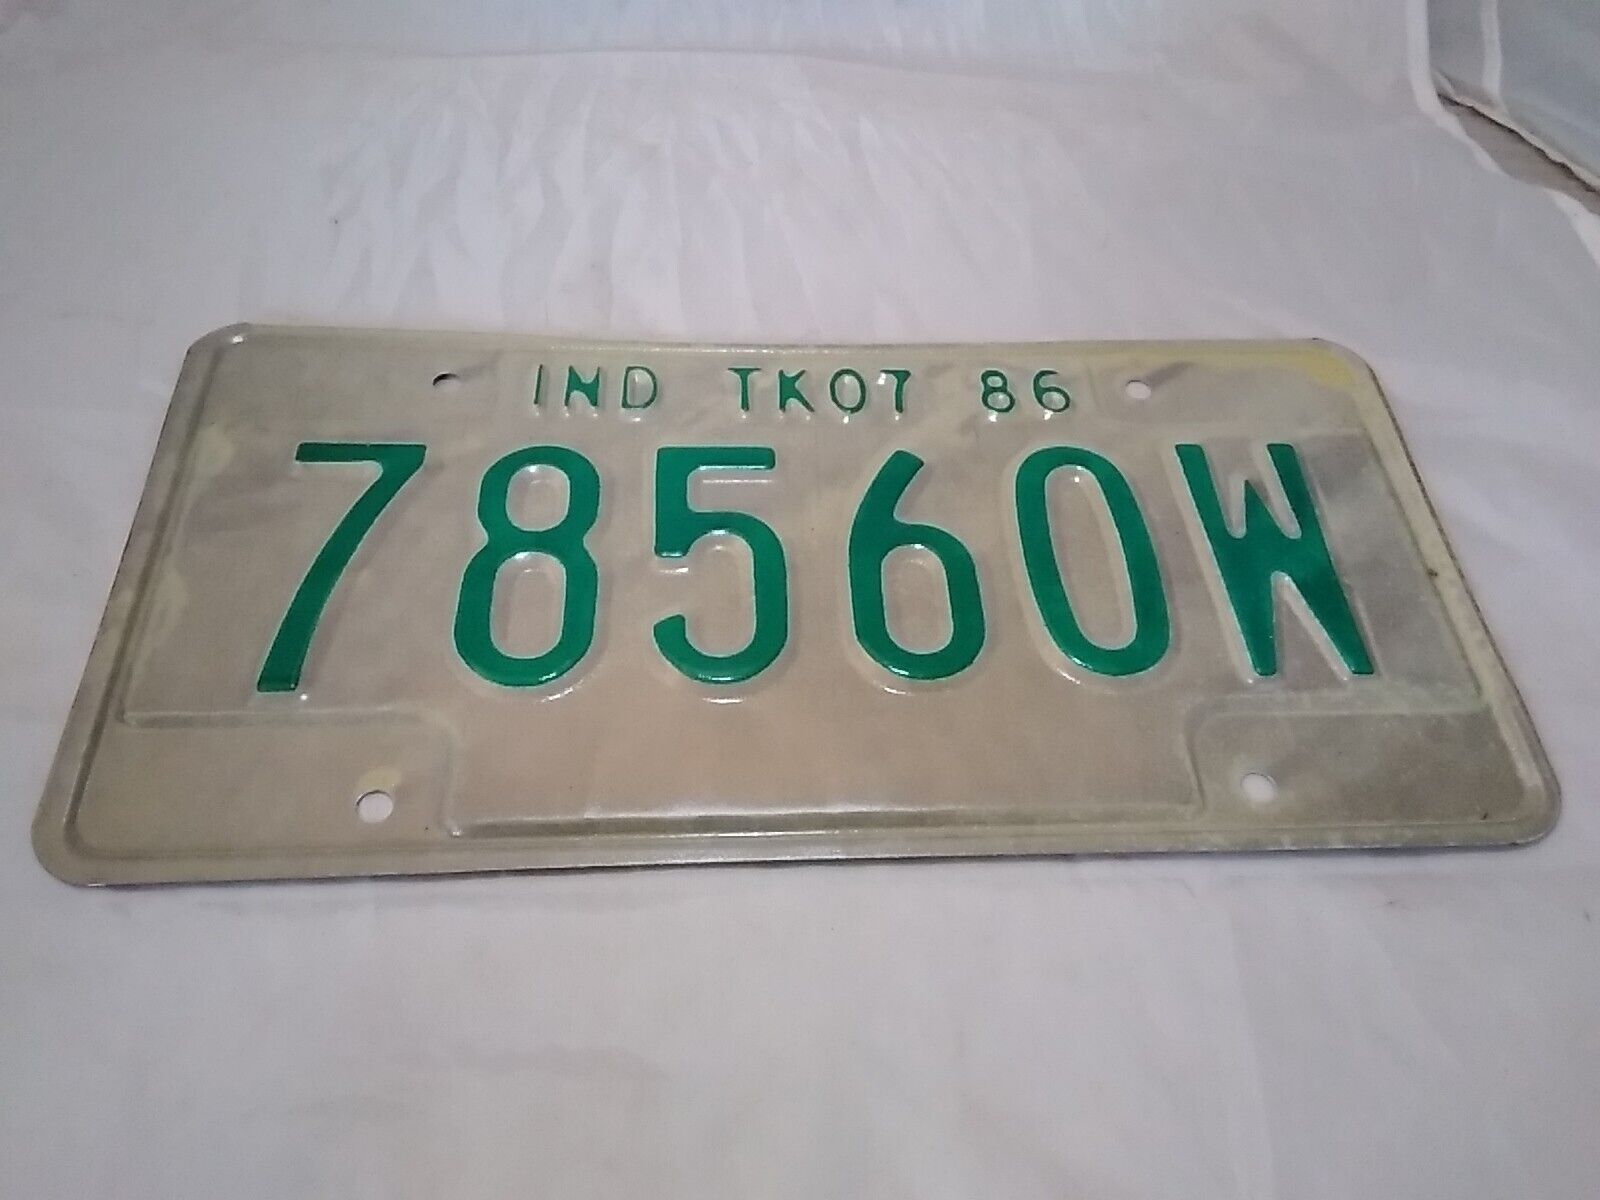 Vintage 1986 Indiana Truck License Plate 78560W